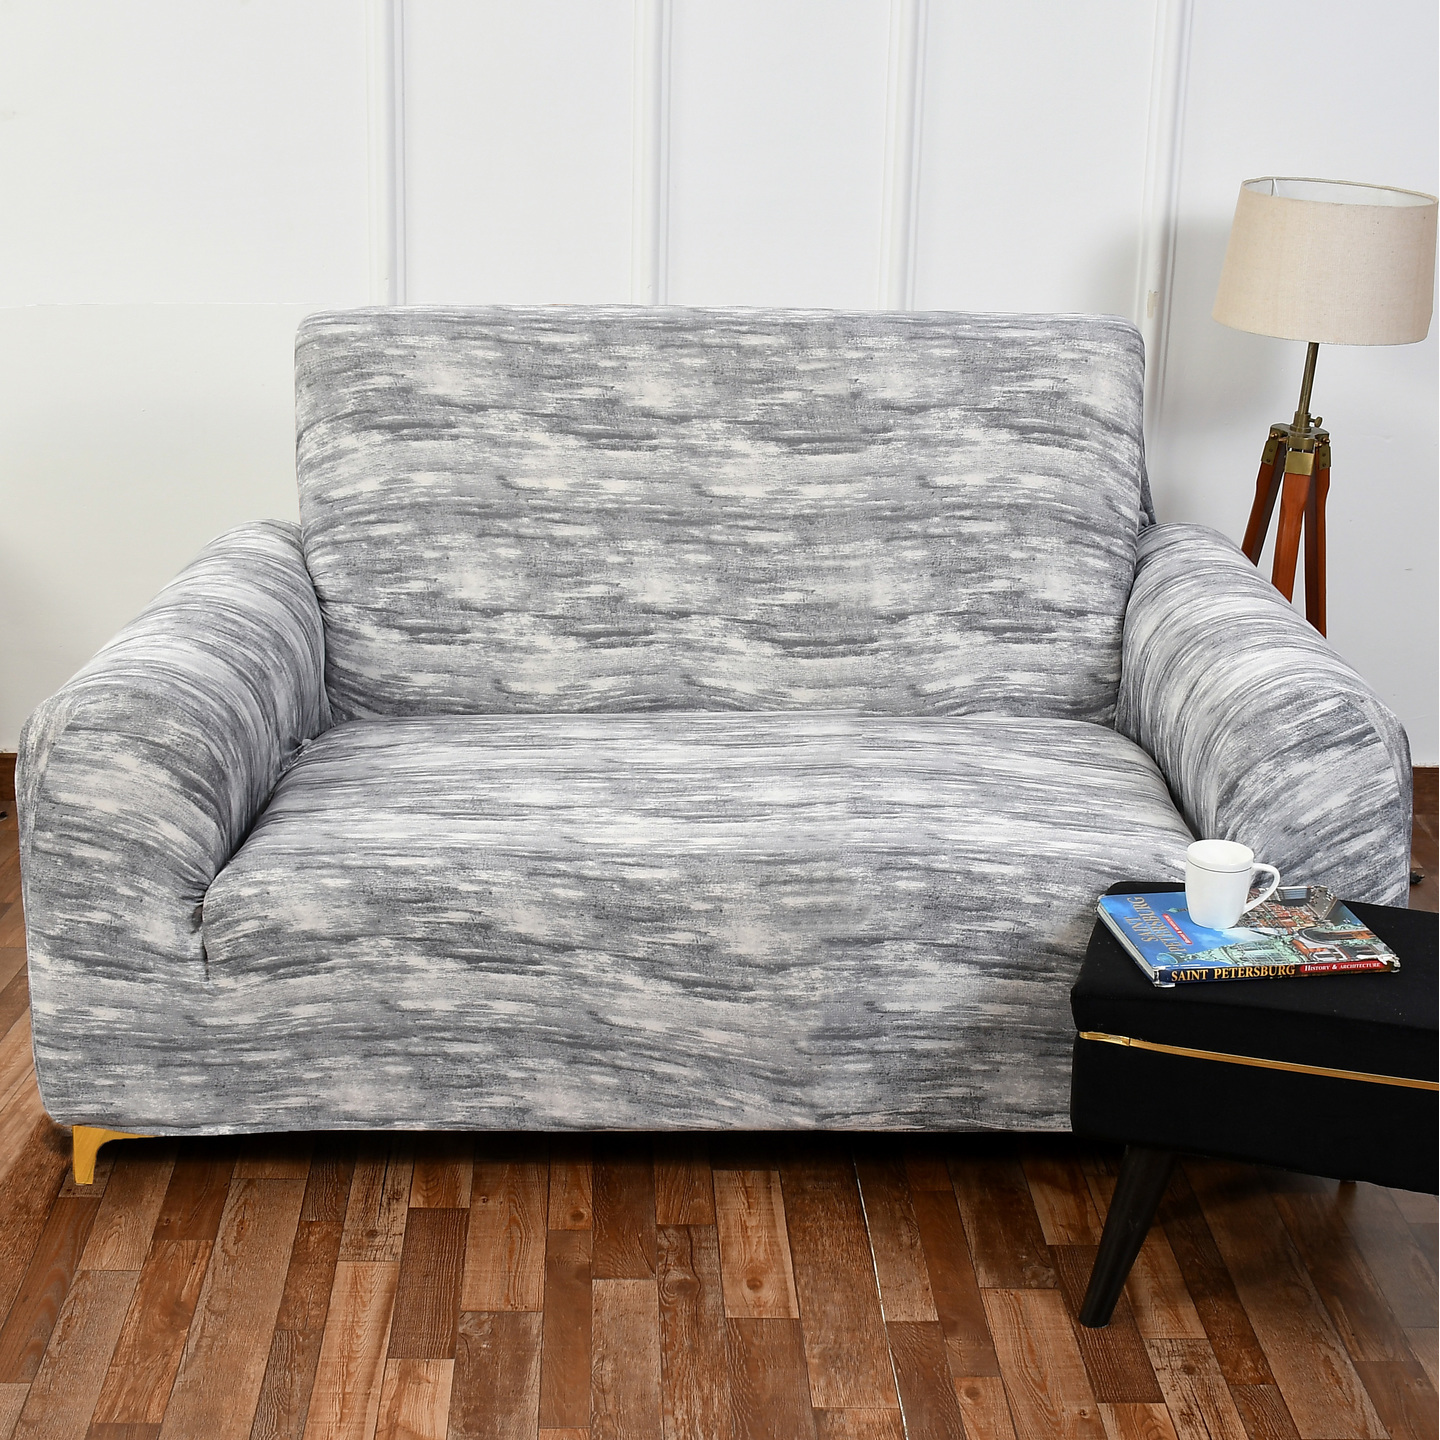 Handtex Home Premium Two Seater Sofa Cover Big Elasticity Cover,Flexible Stretch Sofa Slipcover 2 Seater, 145-185cm Pack Of One Piece Grey